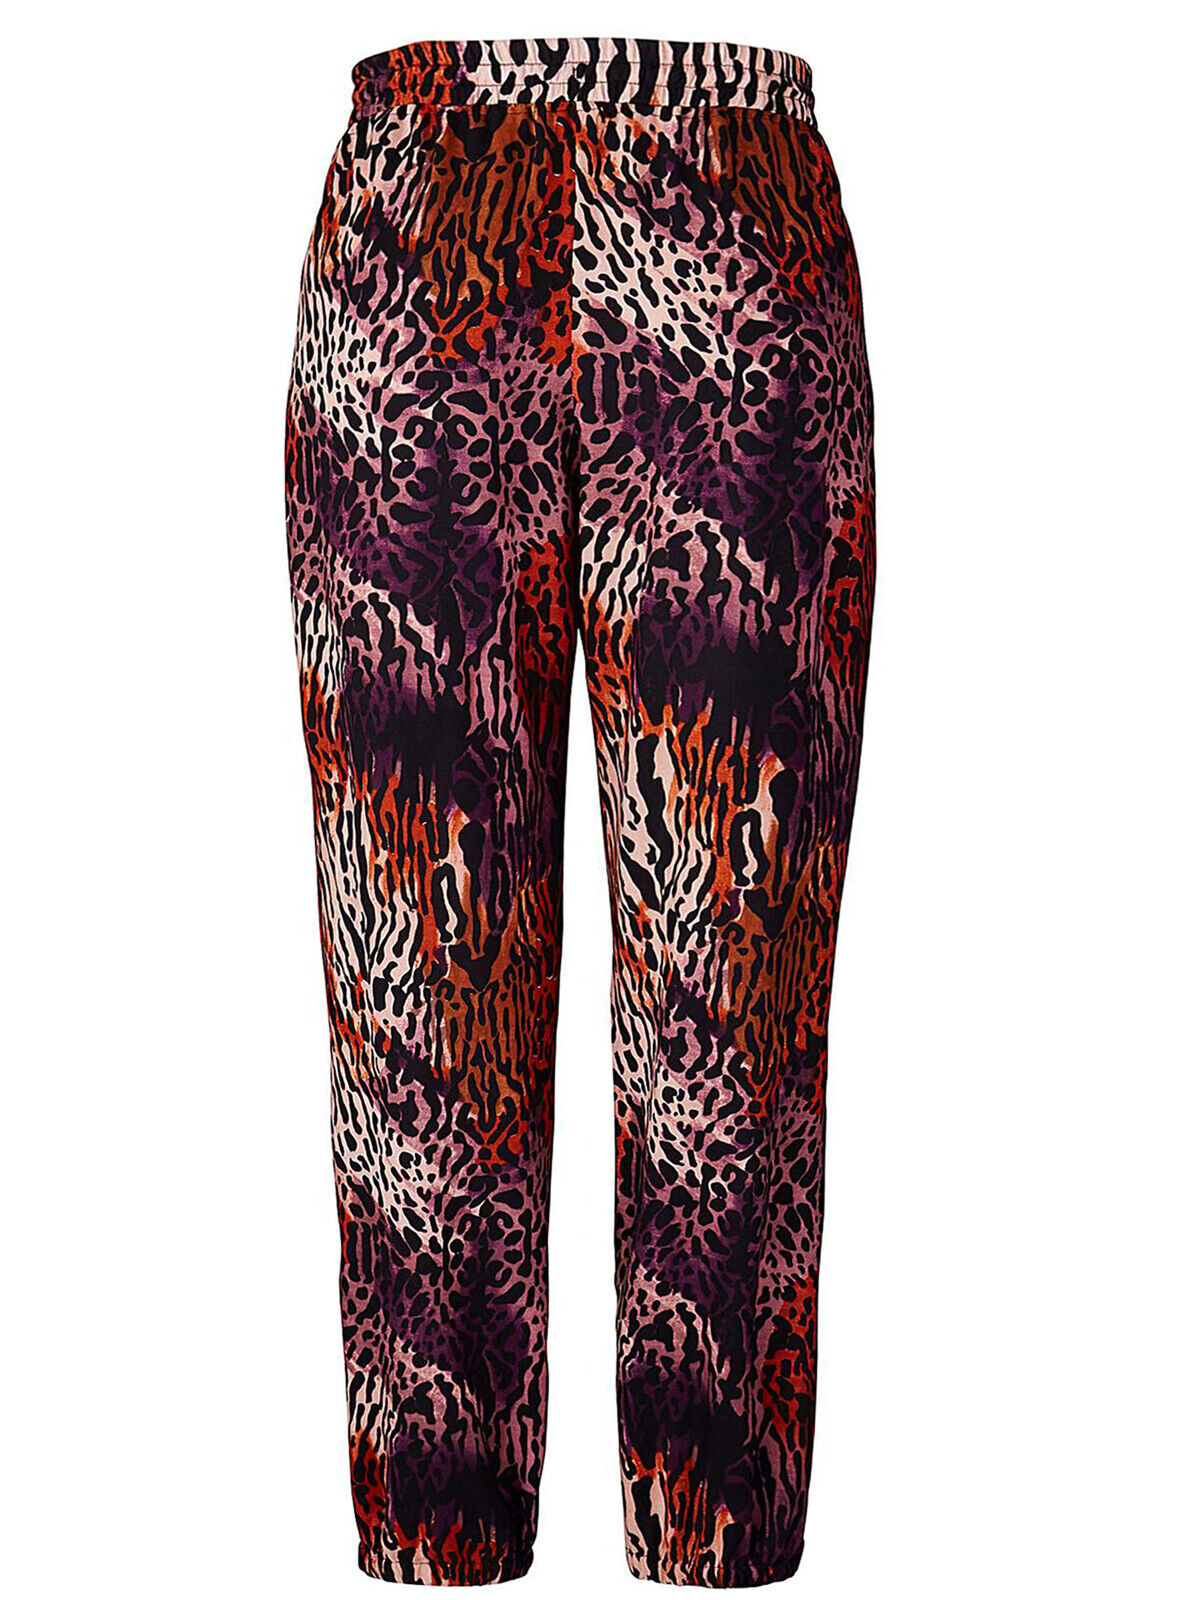 Capsule Black Printed Woven Harem Joggers in Sizes 20 or 32